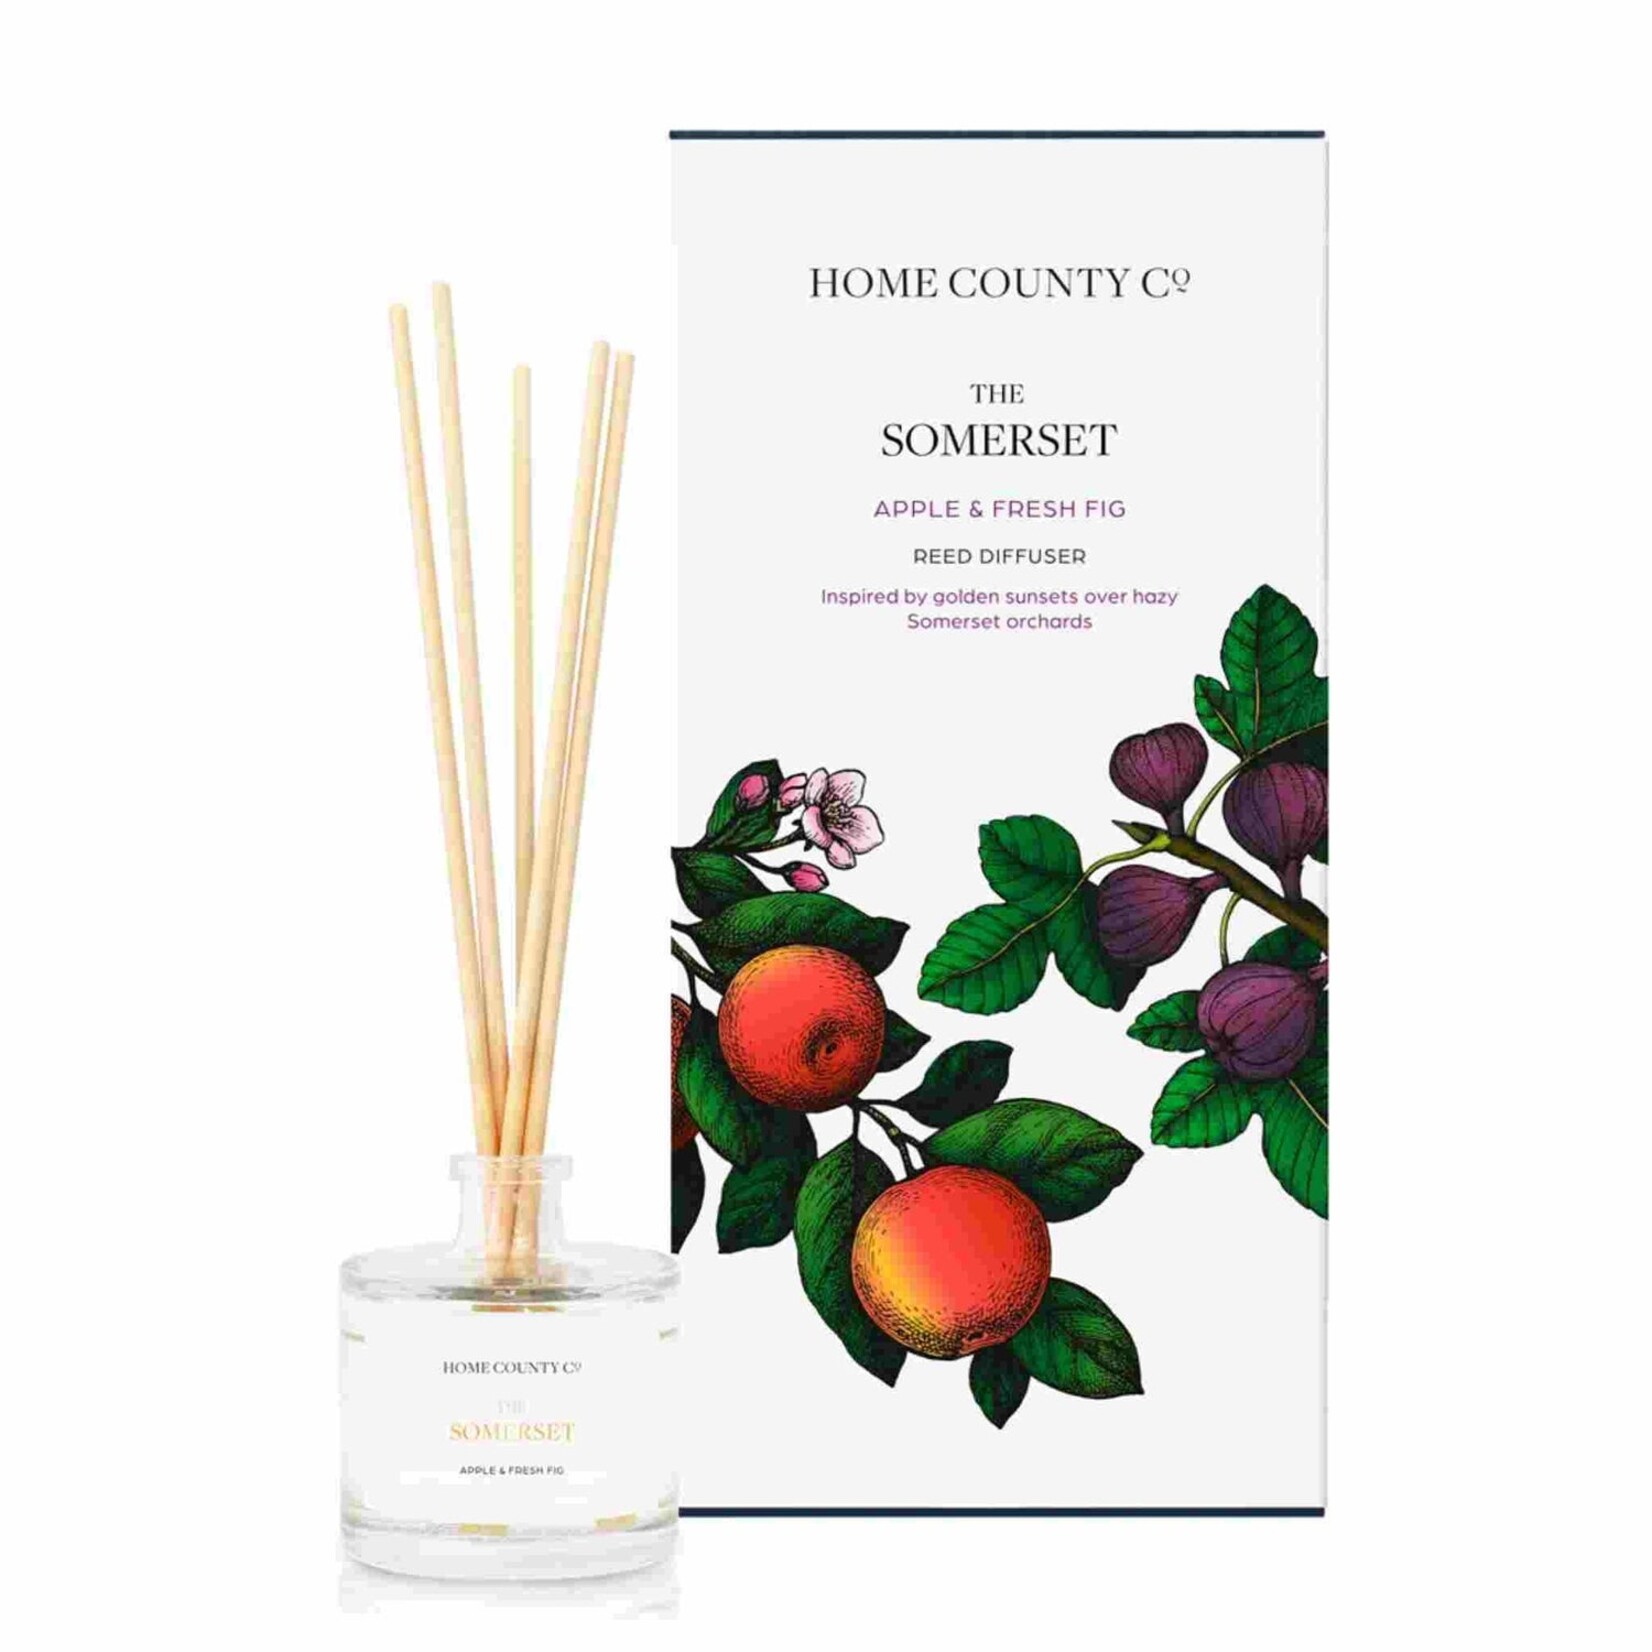 Home County Co. British Reed Diffusers